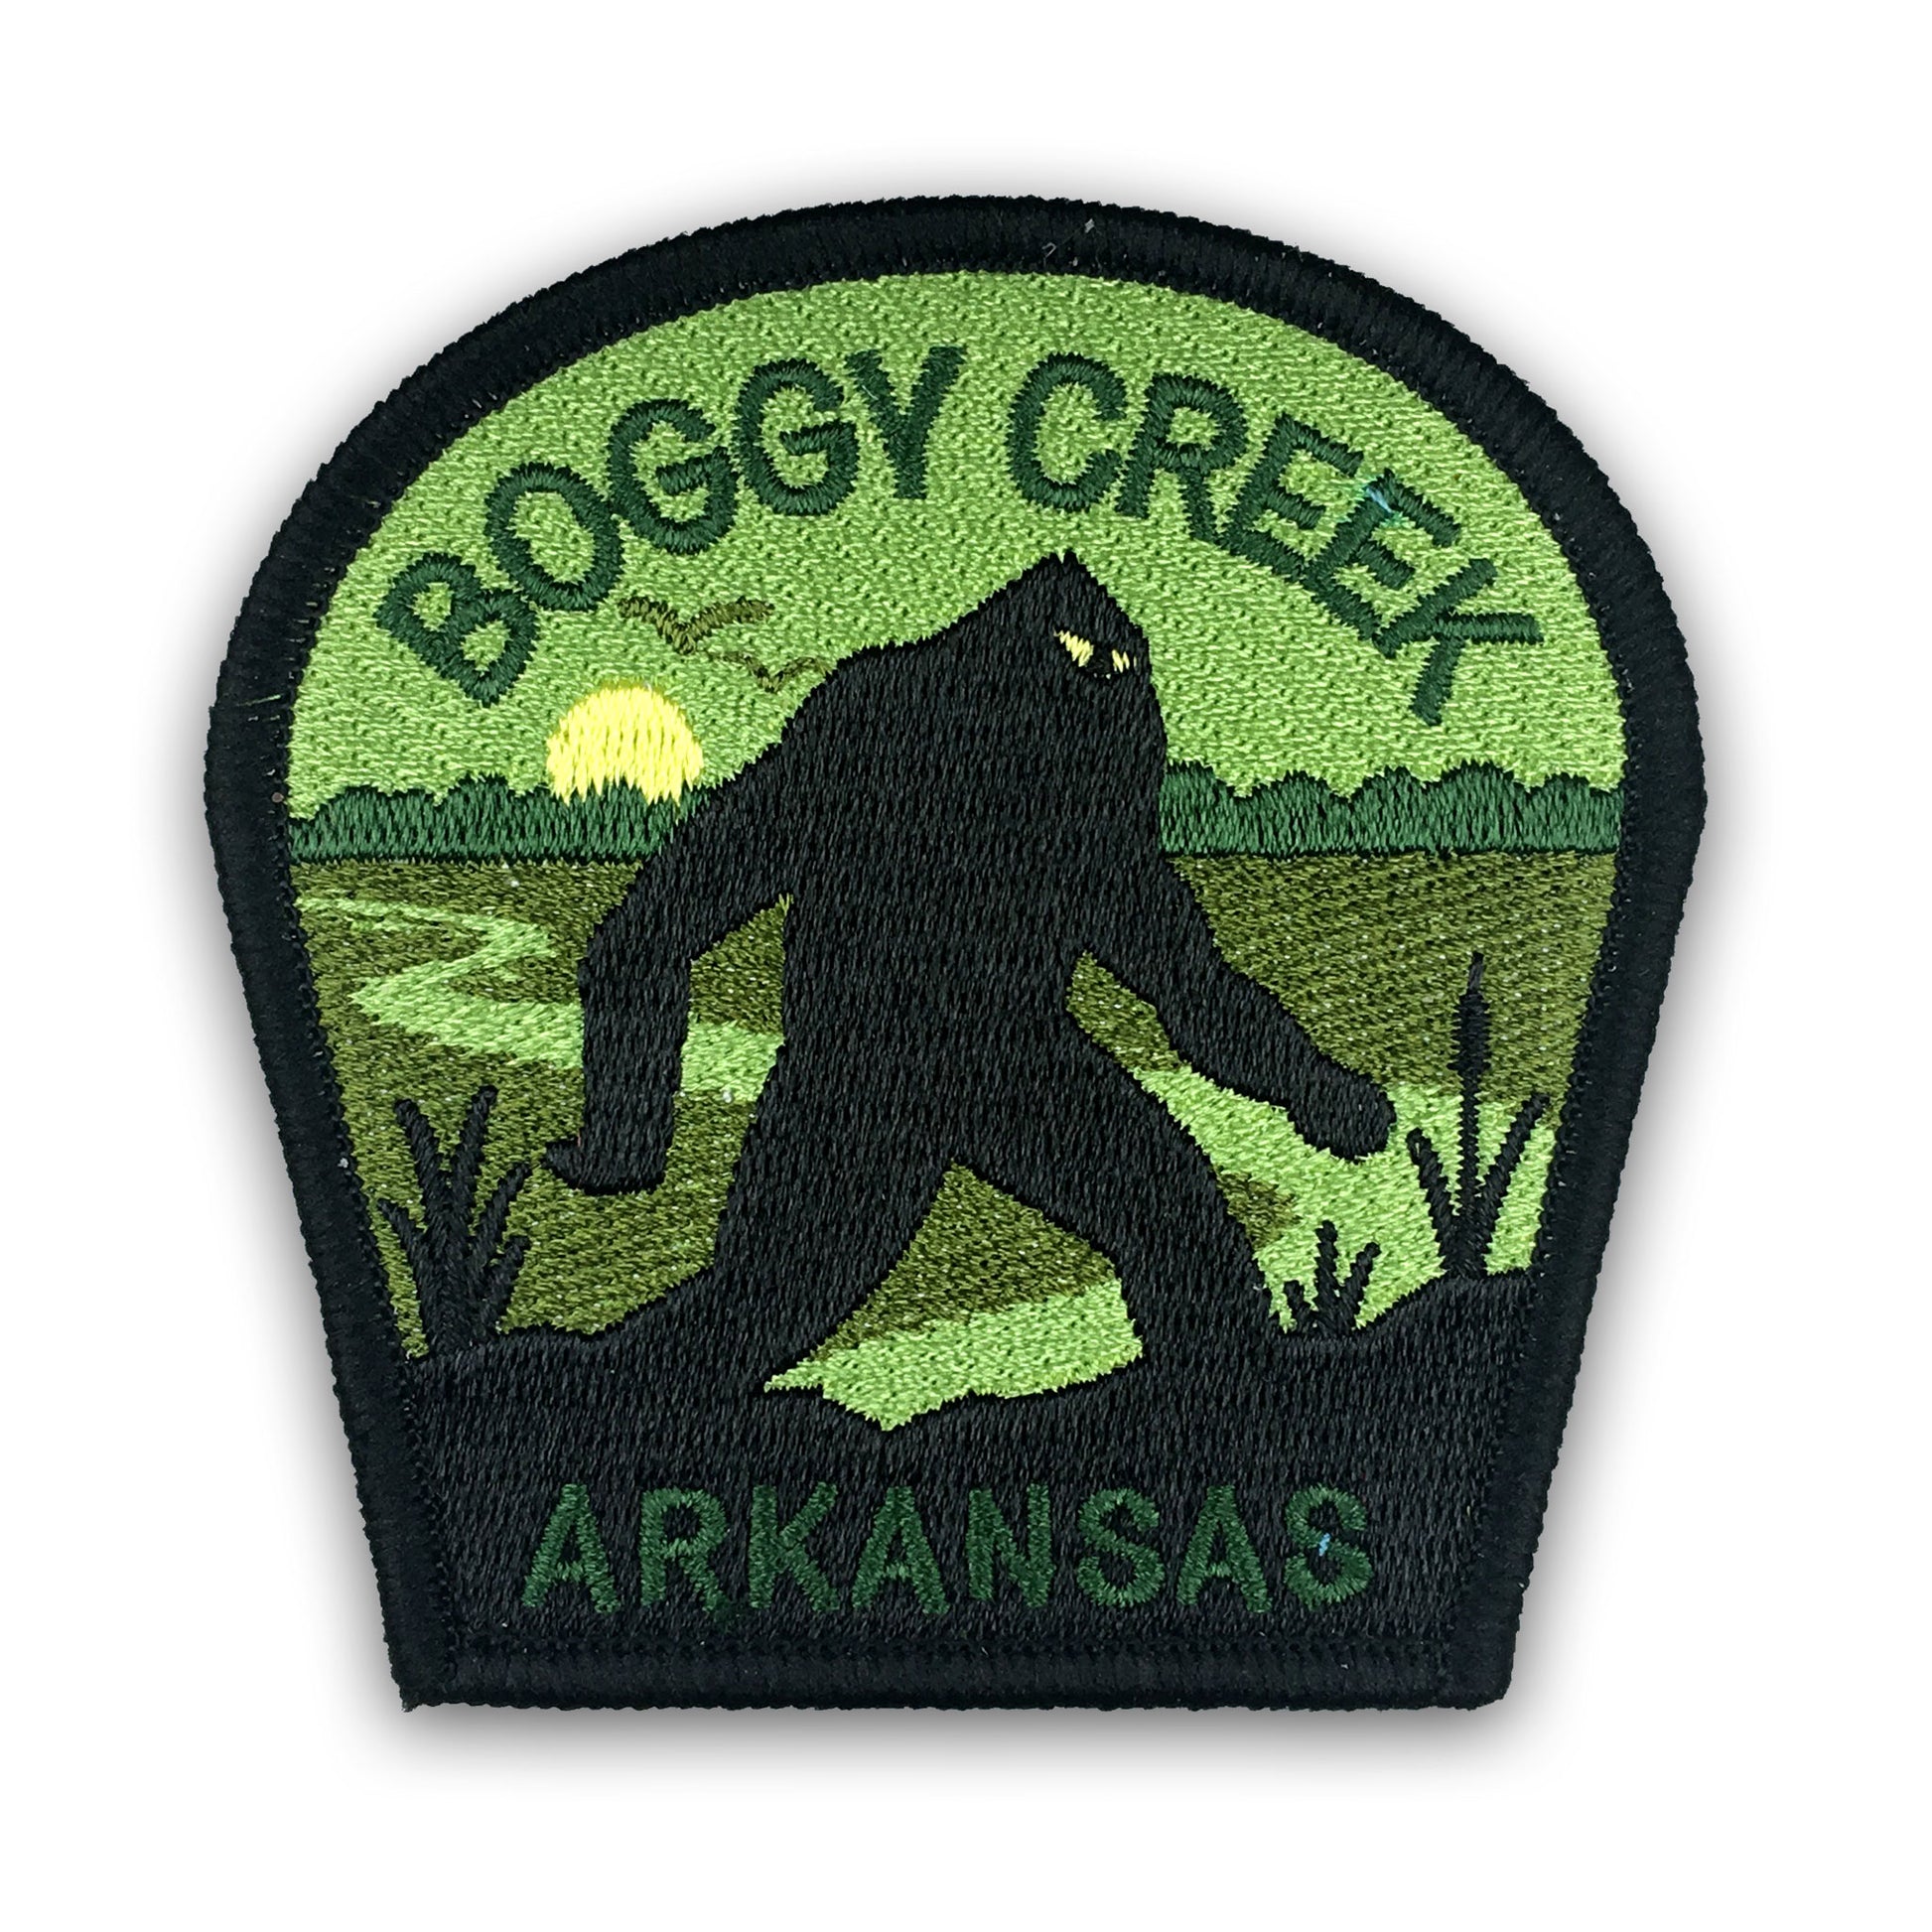 Boggy Creek Arkansas (Fouke Monster) travel patch by Monsterologist